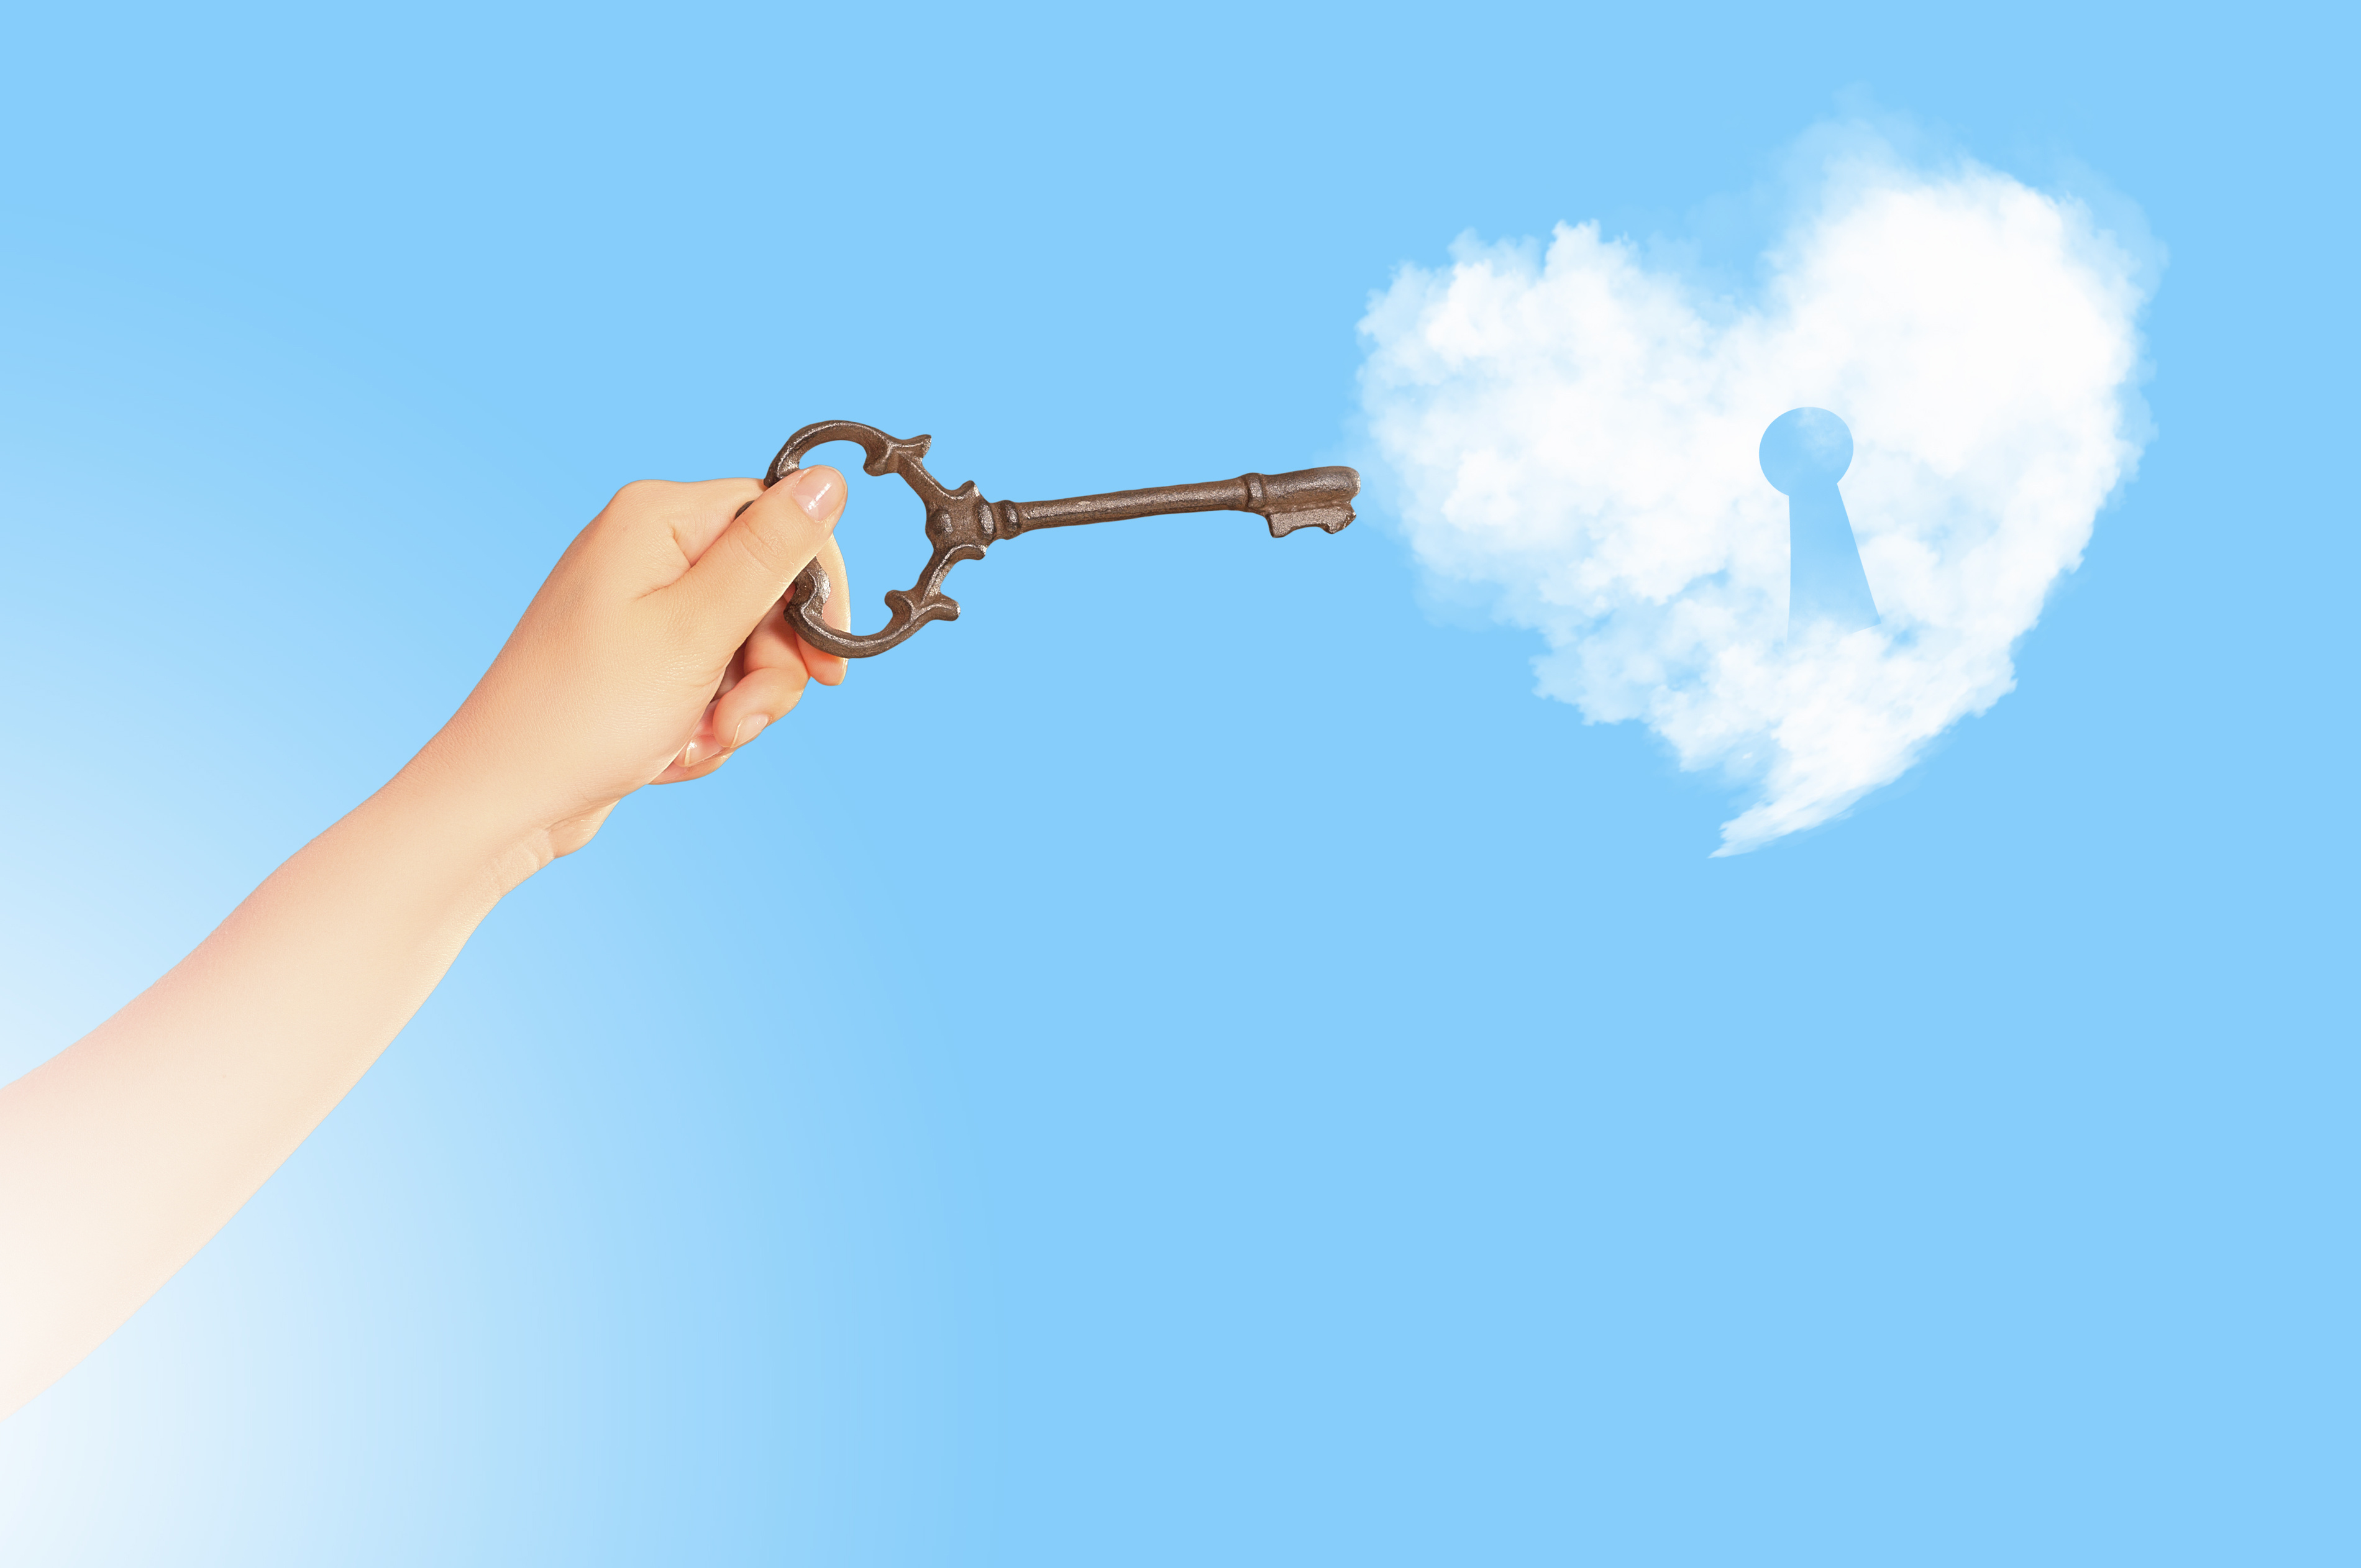 An old fashioned key is held up to a heart shaped cloud with a key hole in it that fits the key in the woman's hand holding it.  The background is sky blue.